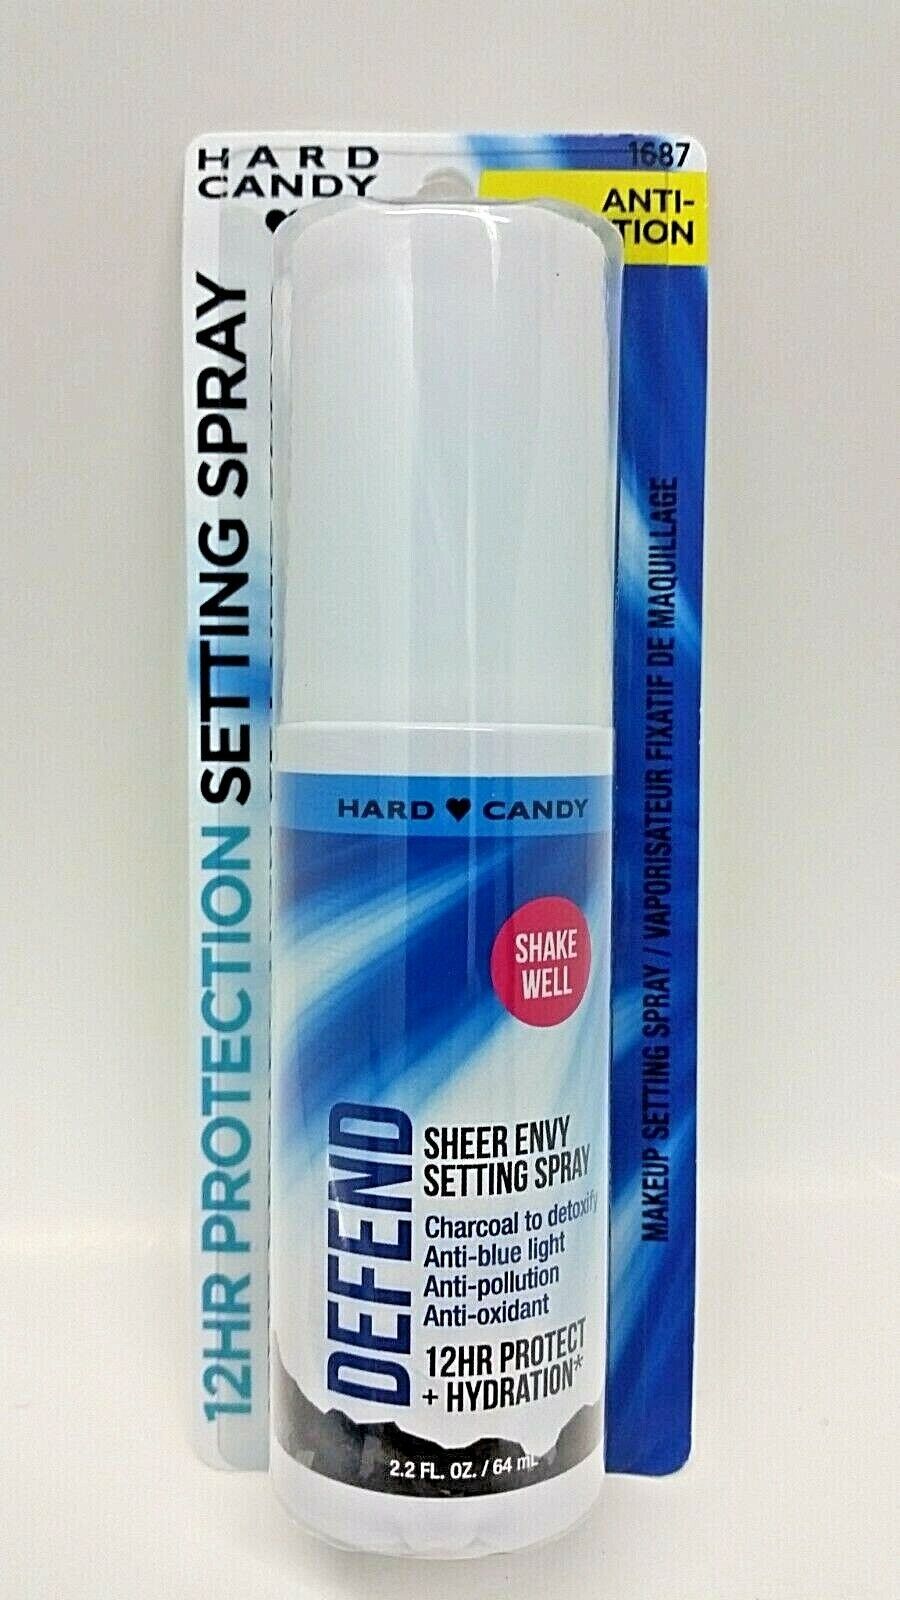 Primary image for 3x  HARD CANDY 12 HR PROTECTION DEFEND SHEER ENVY SETTING SPRAY - ANTI-POLLUTION